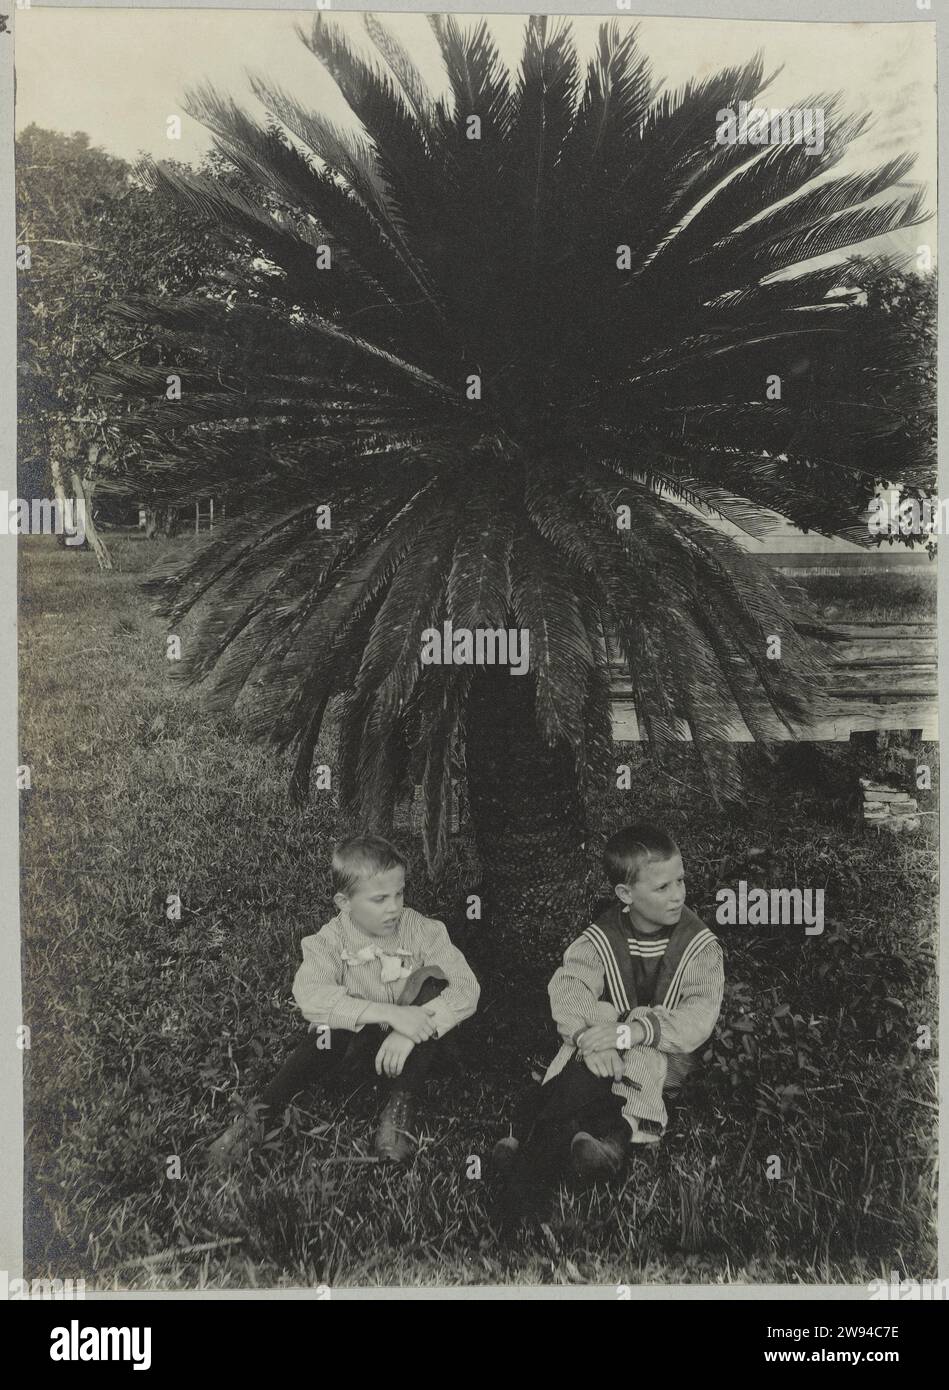 Anton and Piet under Sagopalm. (Tourtonne), 1903 - 1910 photograph Two Dutch boys named Anton and Piet sitting under a sagopalm on the Plantage Tourtonne. Part of the photo album Souvenir de Voyage (part 1), about the life of the Doijer family in and around the MA retreat plantation in Suriname in the years 1903-1910. Suriname photographic support gelatin silver print  Suriname. Planting my retirement. Crap Stock Photo